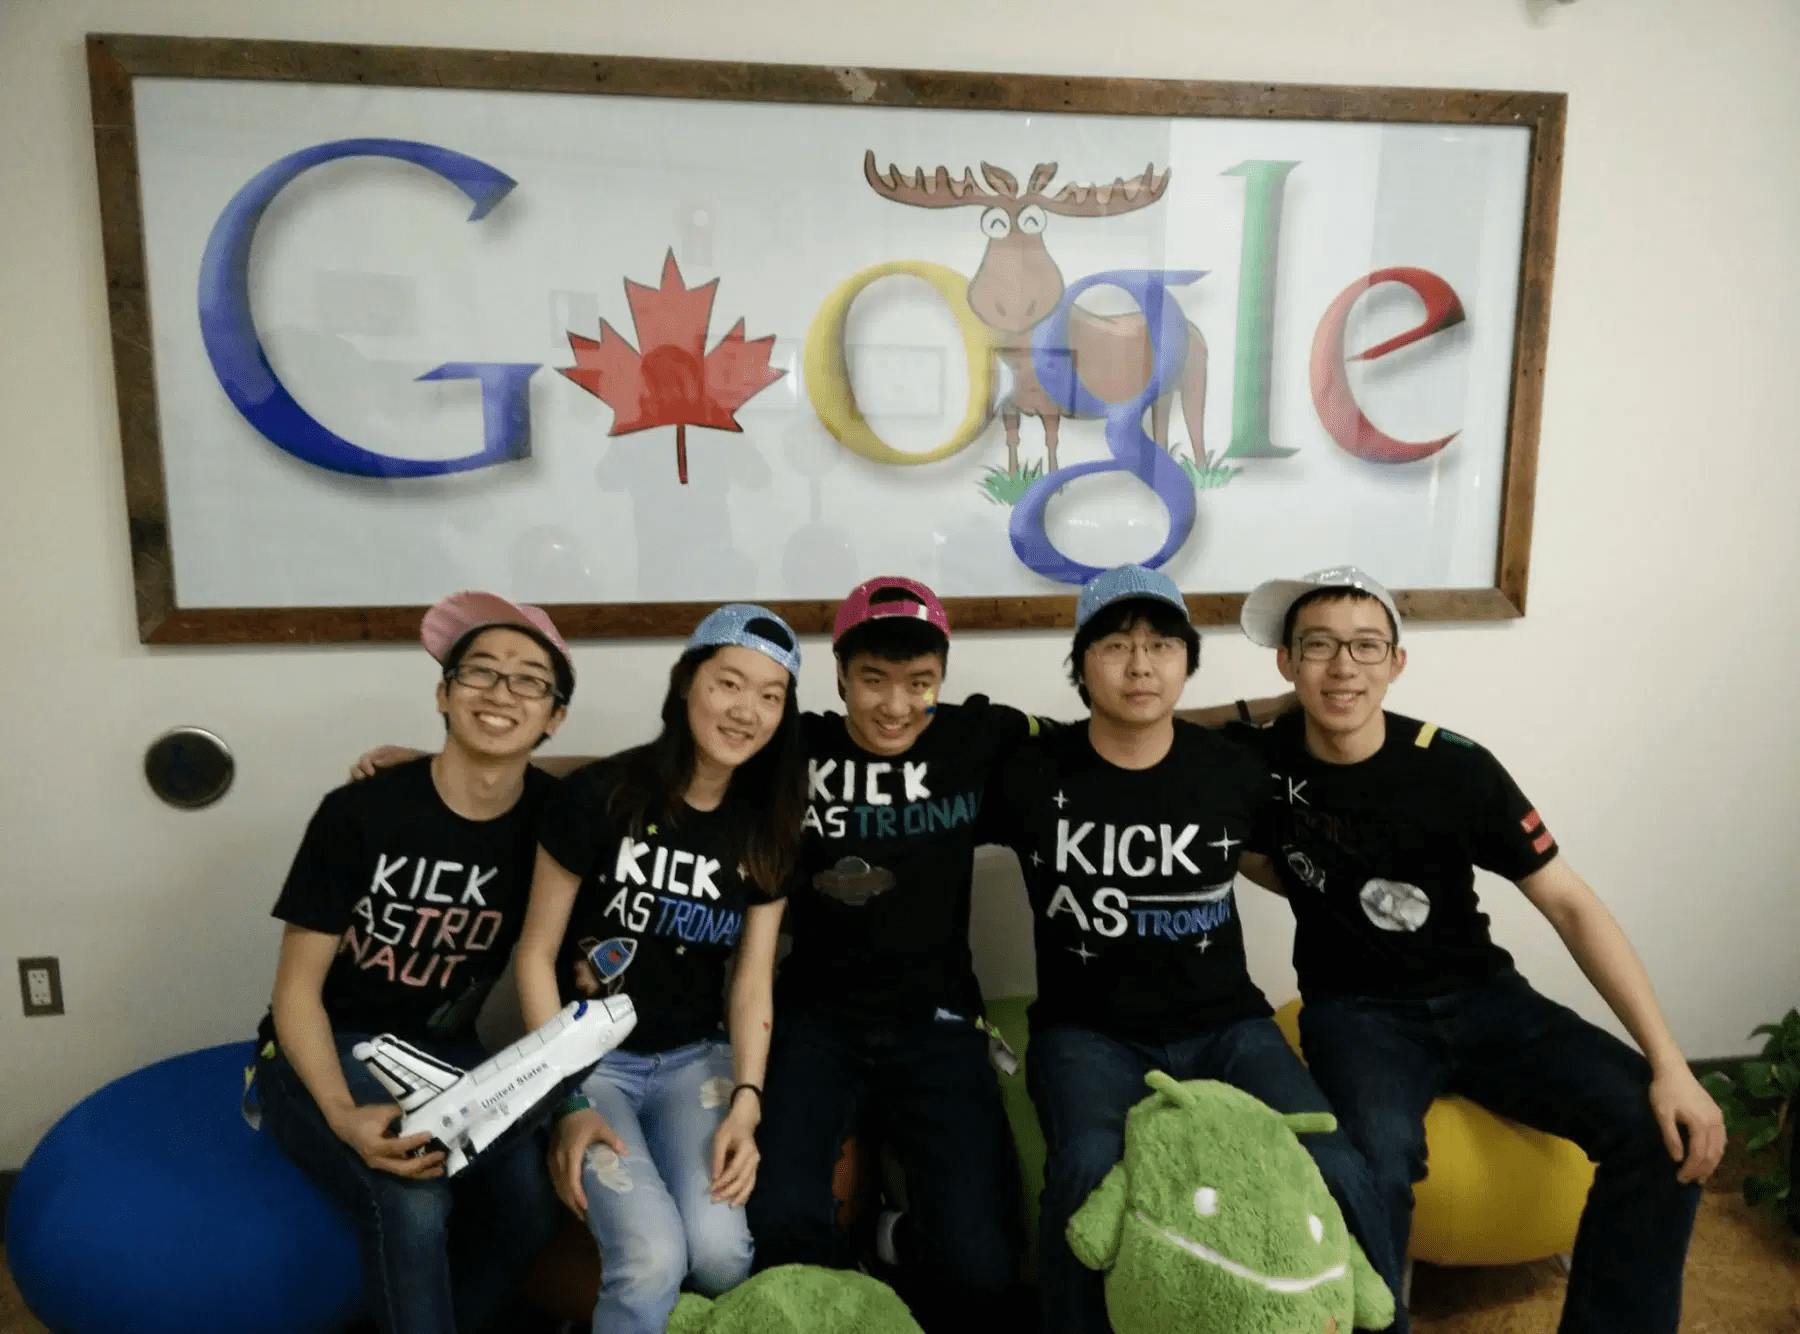 The Google Games 2015 champions! The theme was Space, so we called ourselves the KickAstronauts!